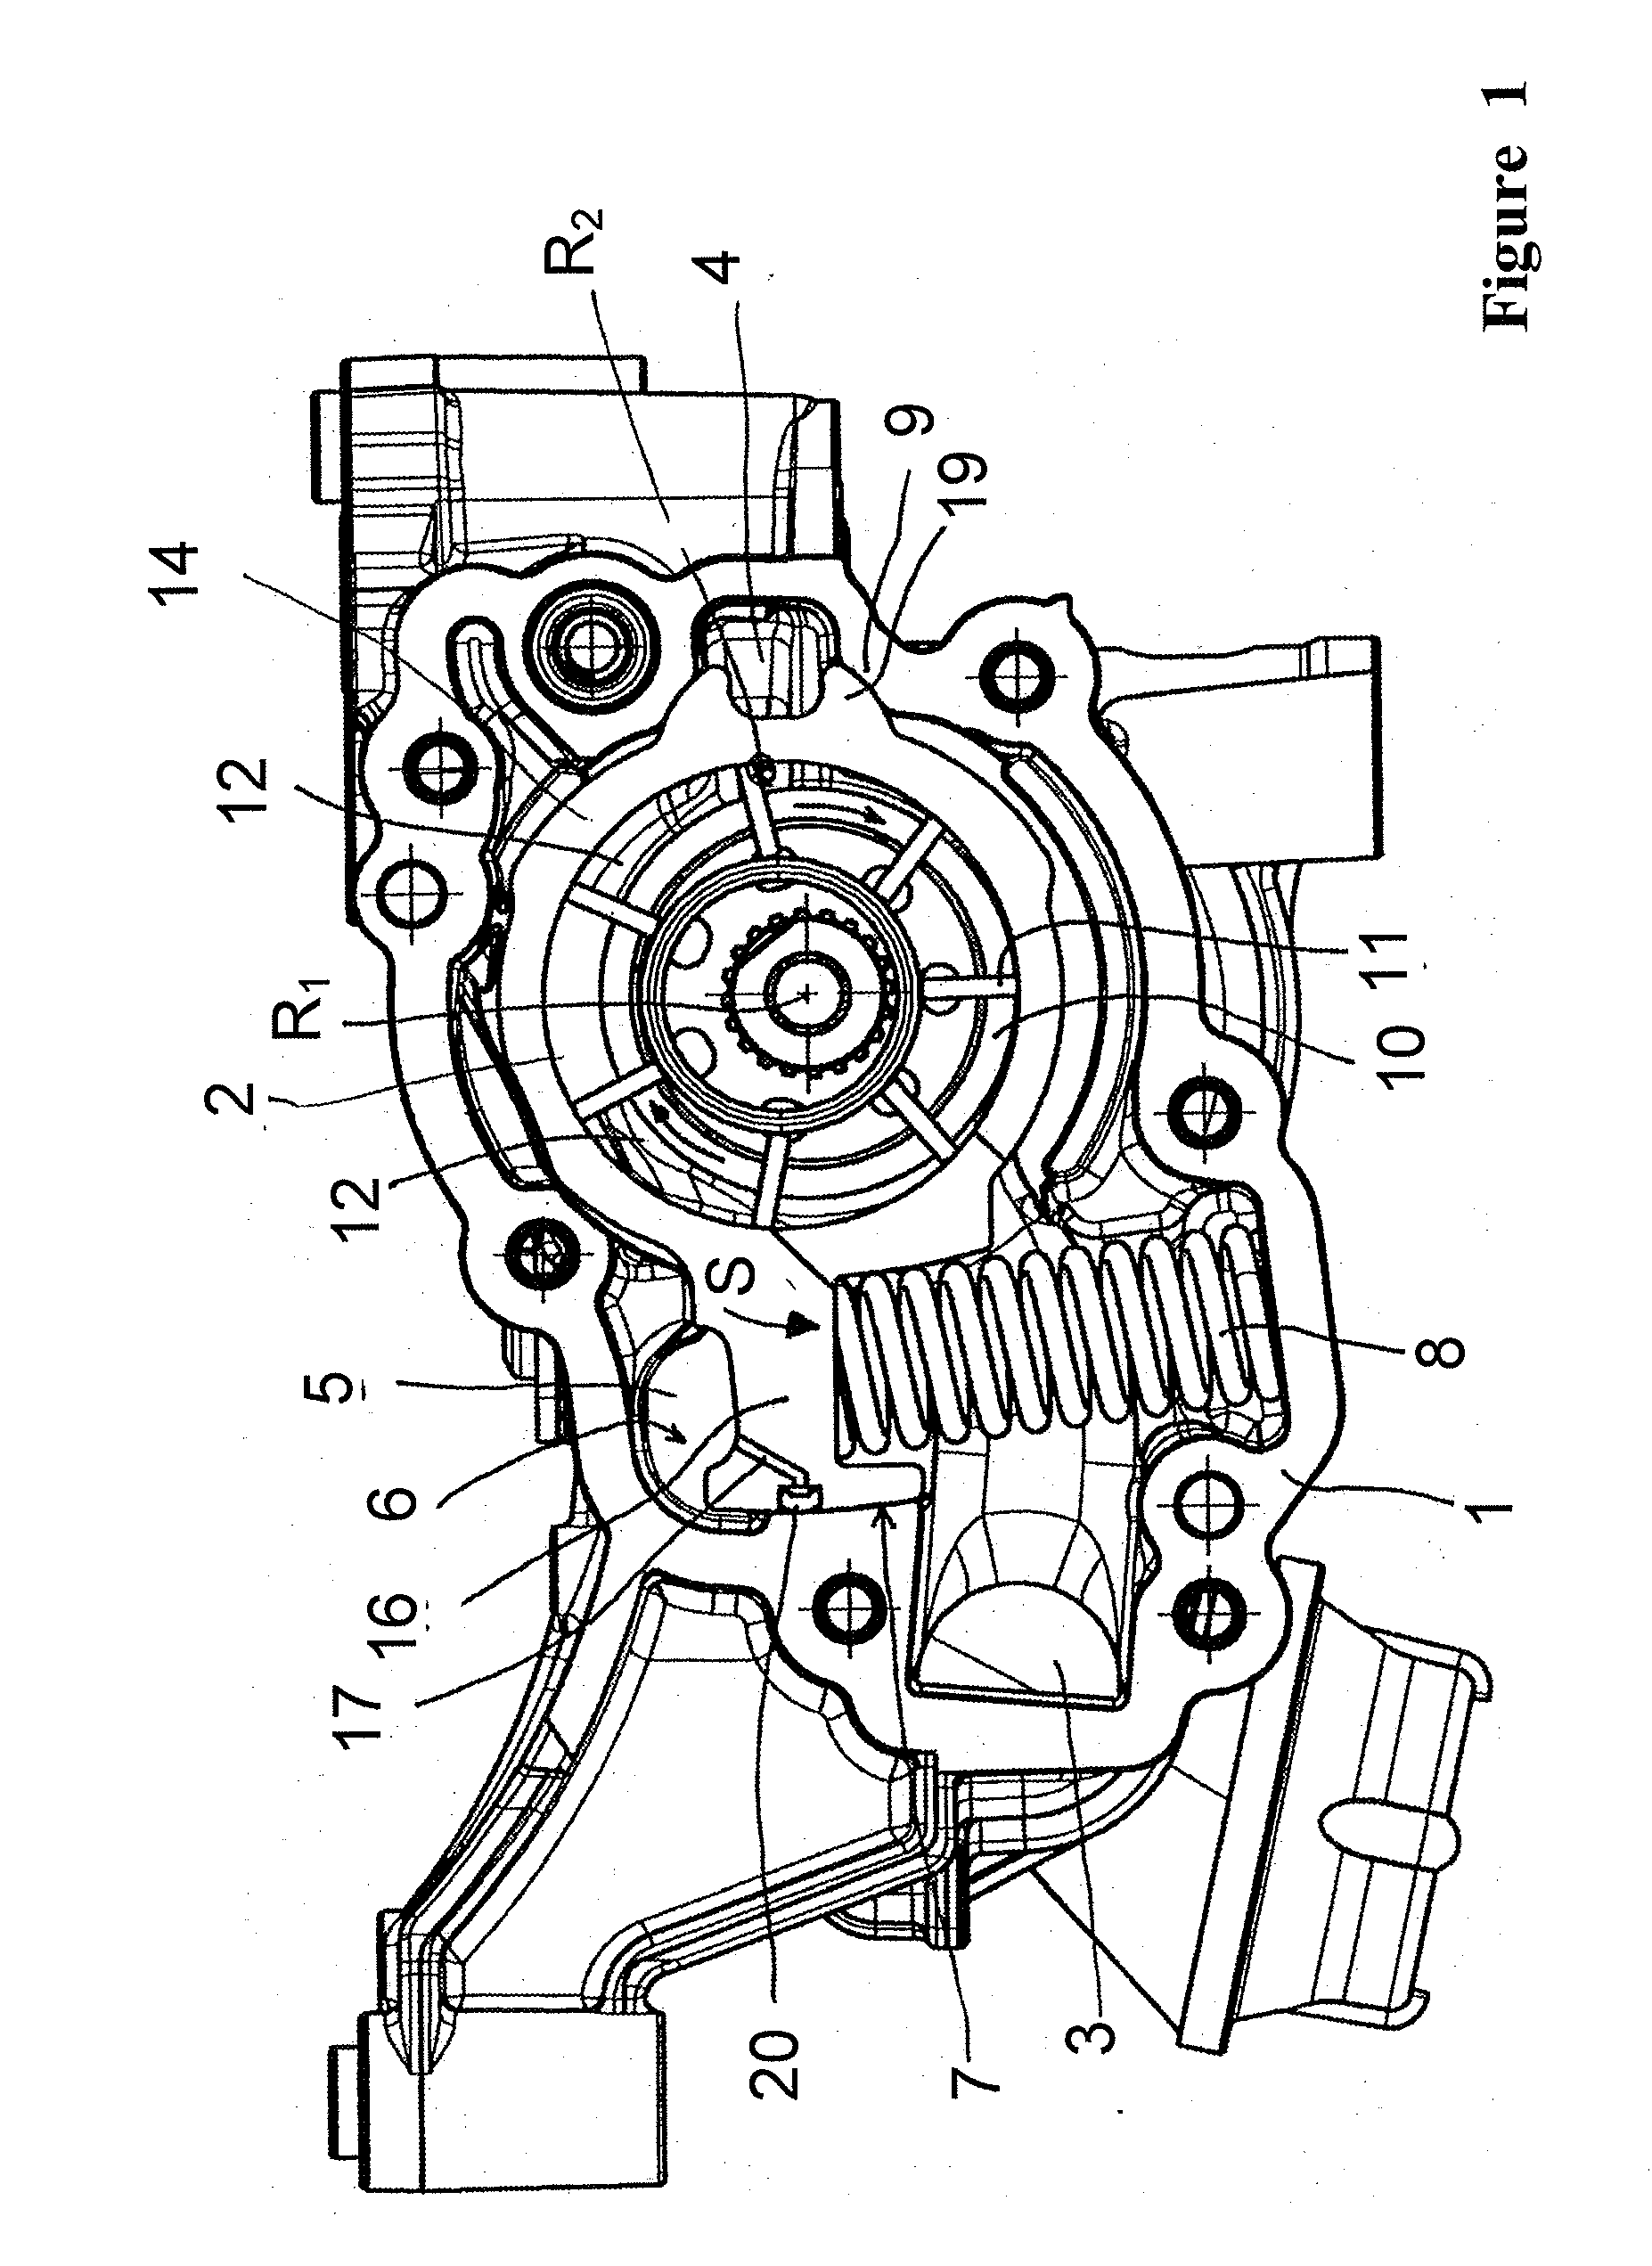 Rotary pump with improved seal